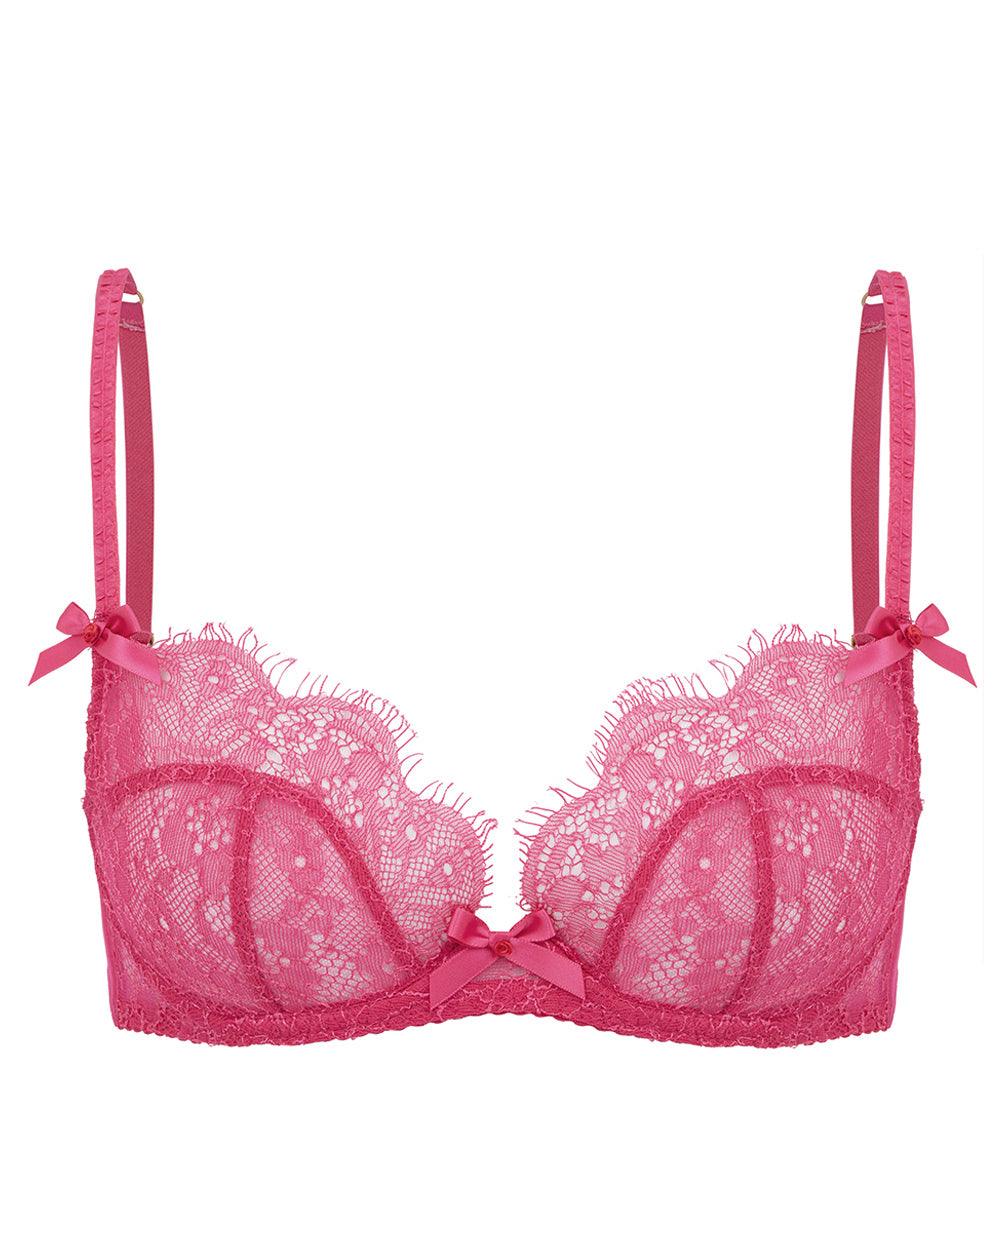 30DD push up bras - 36 products